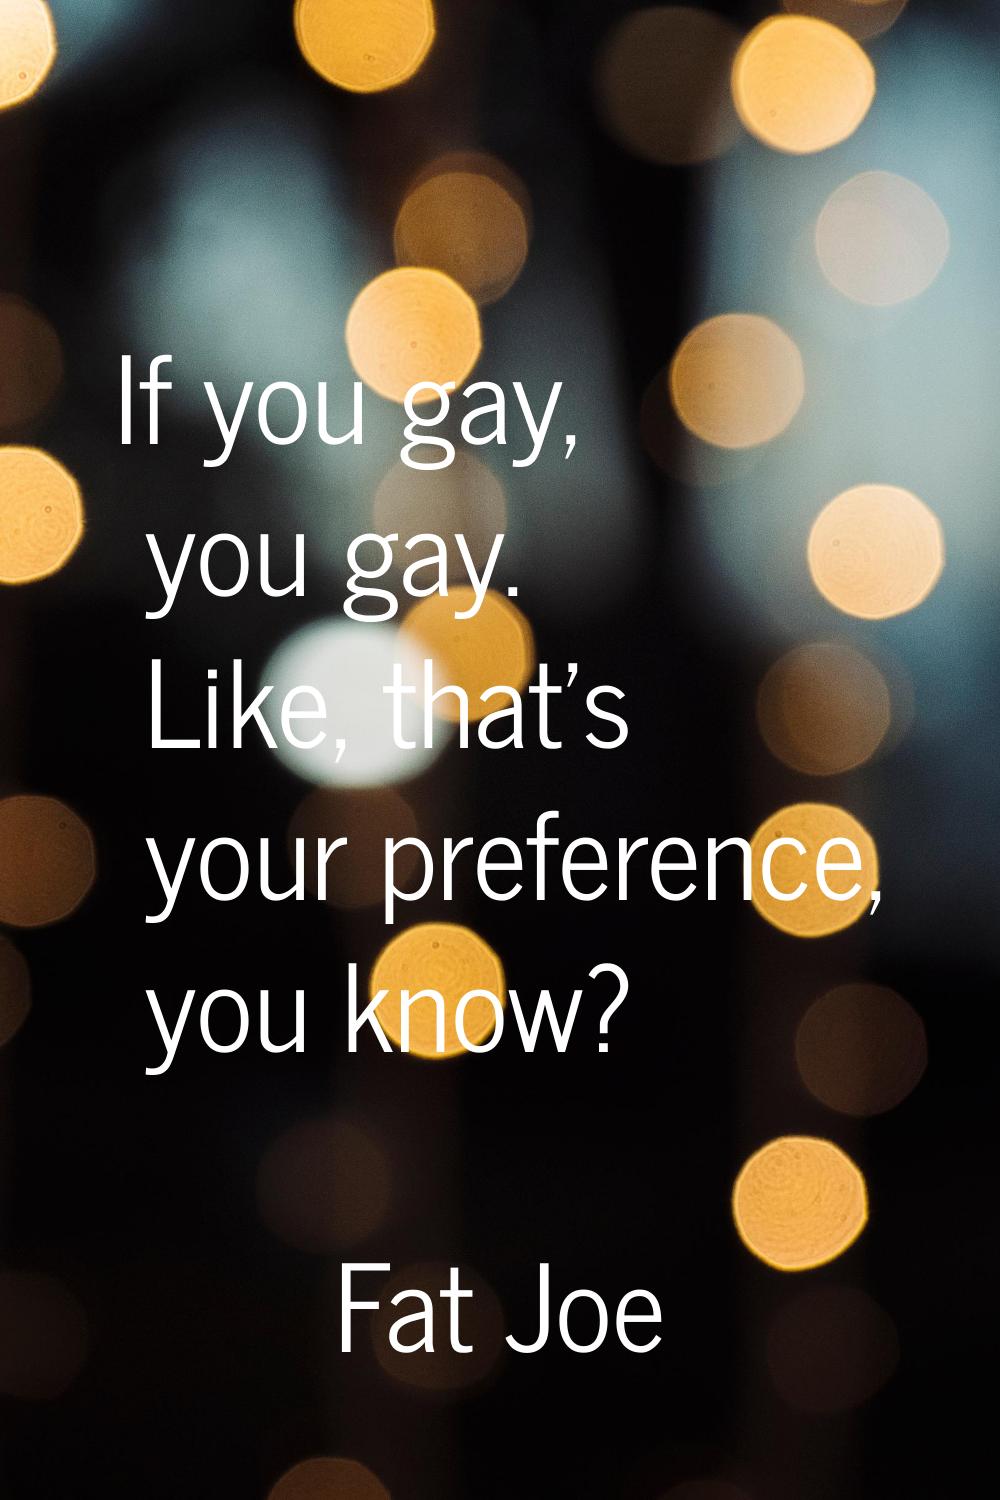 If you gay, you gay. Like, that's your preference, you know?